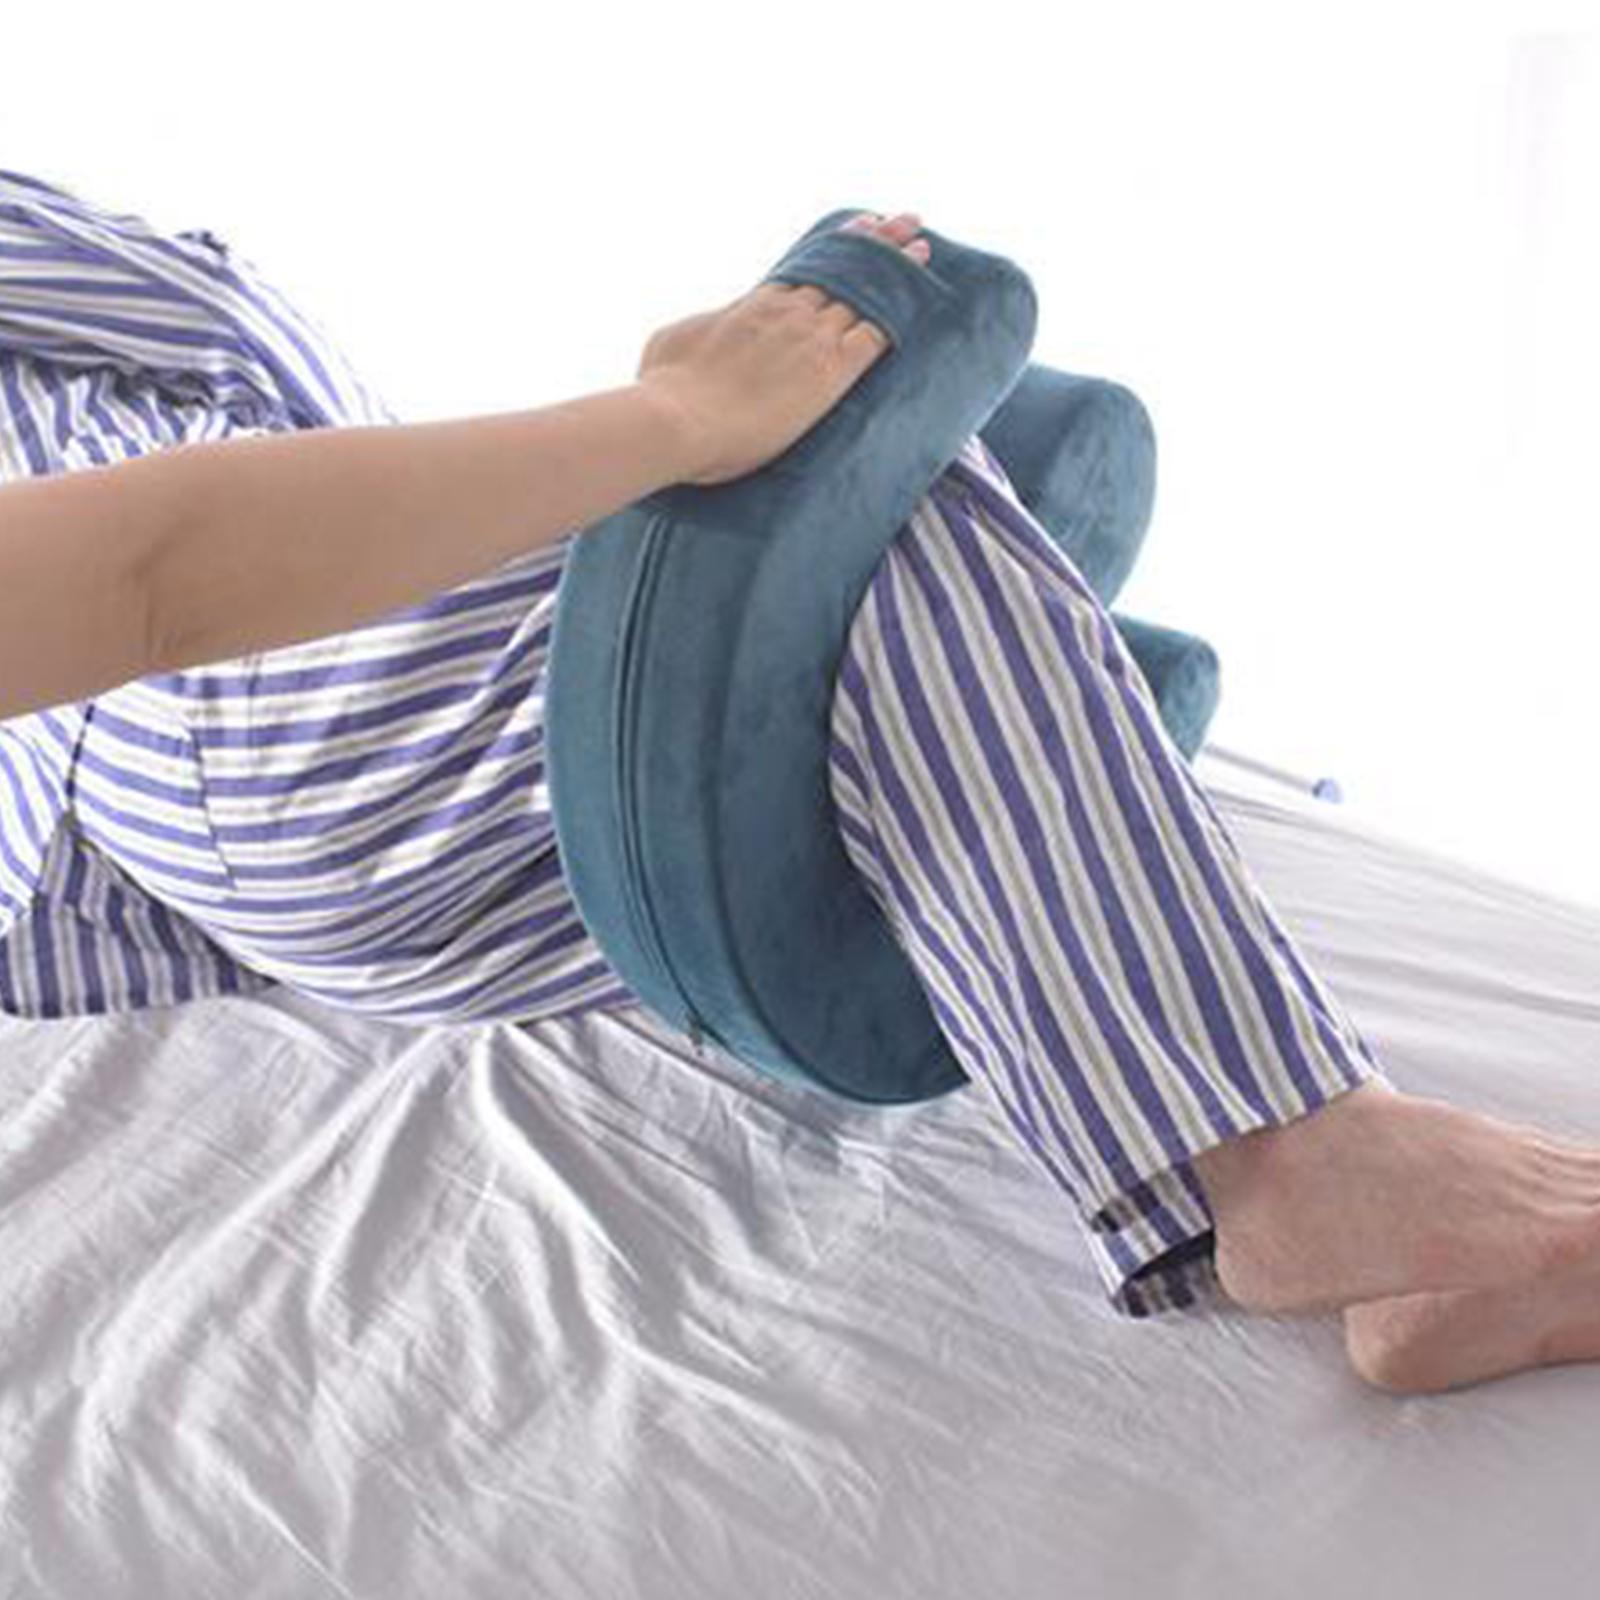 Elderly Turning Device Assistant, Turn Over Pillow Bedsore Pad, for Elder Patient